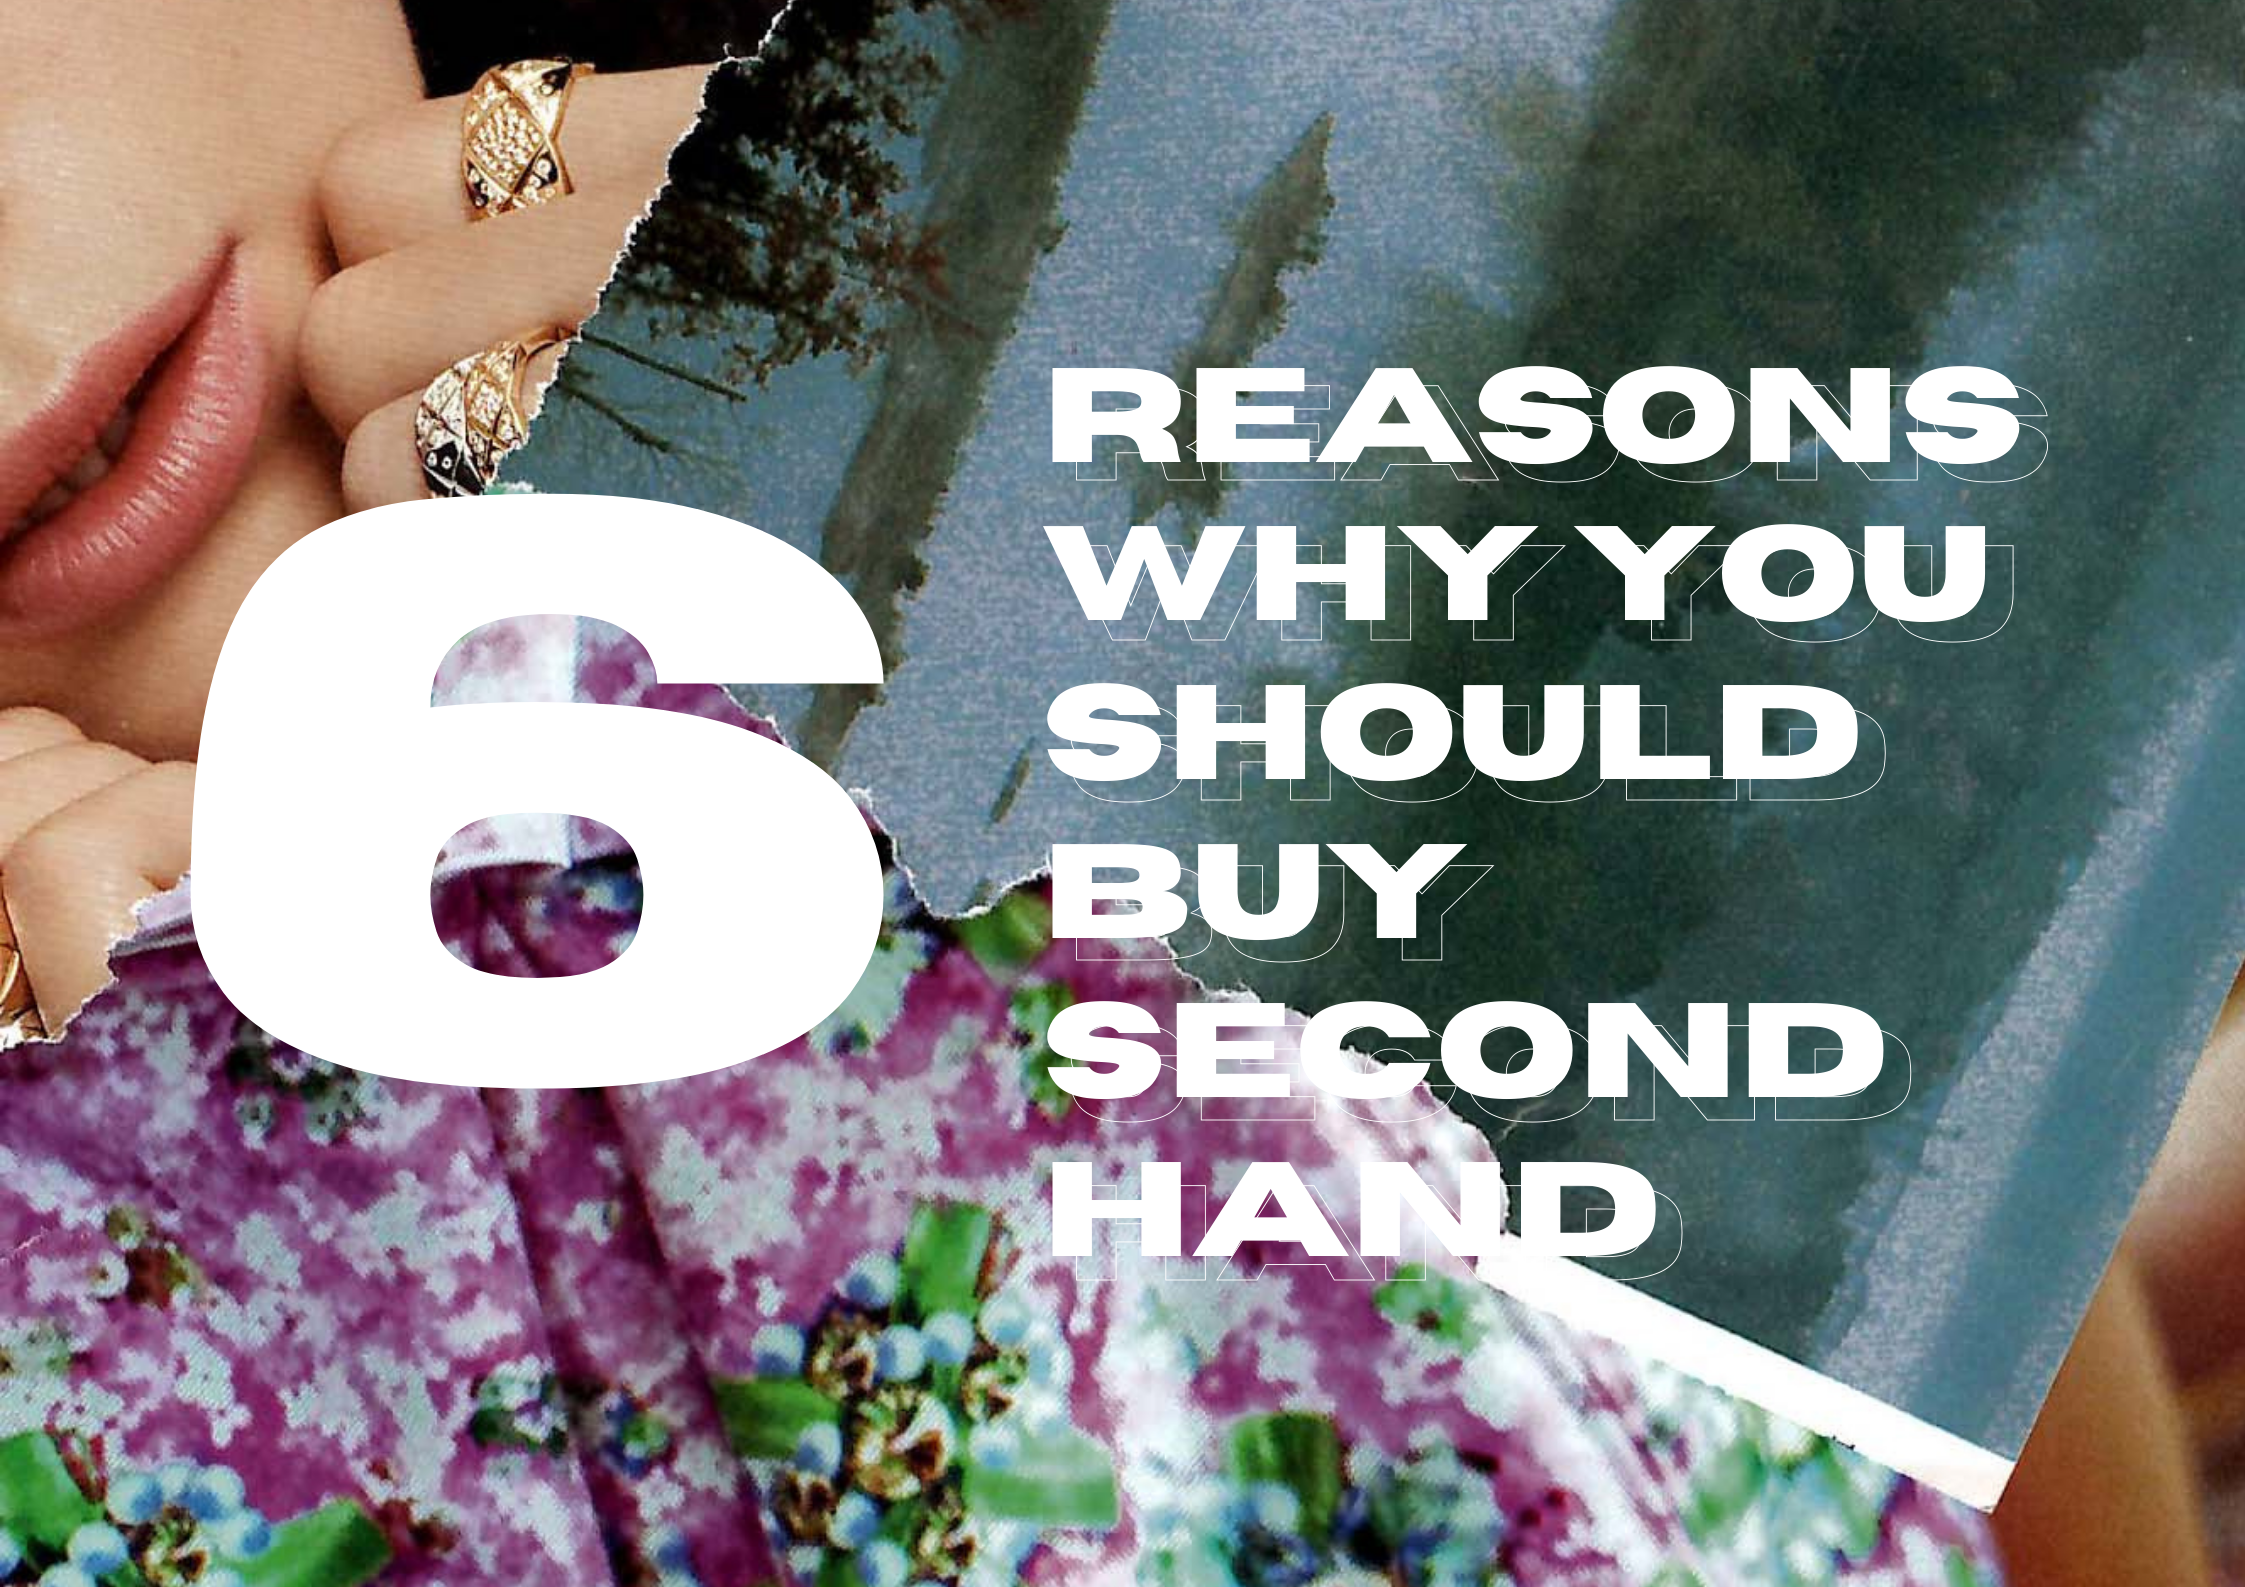 What are your rights when you shop second-hand?